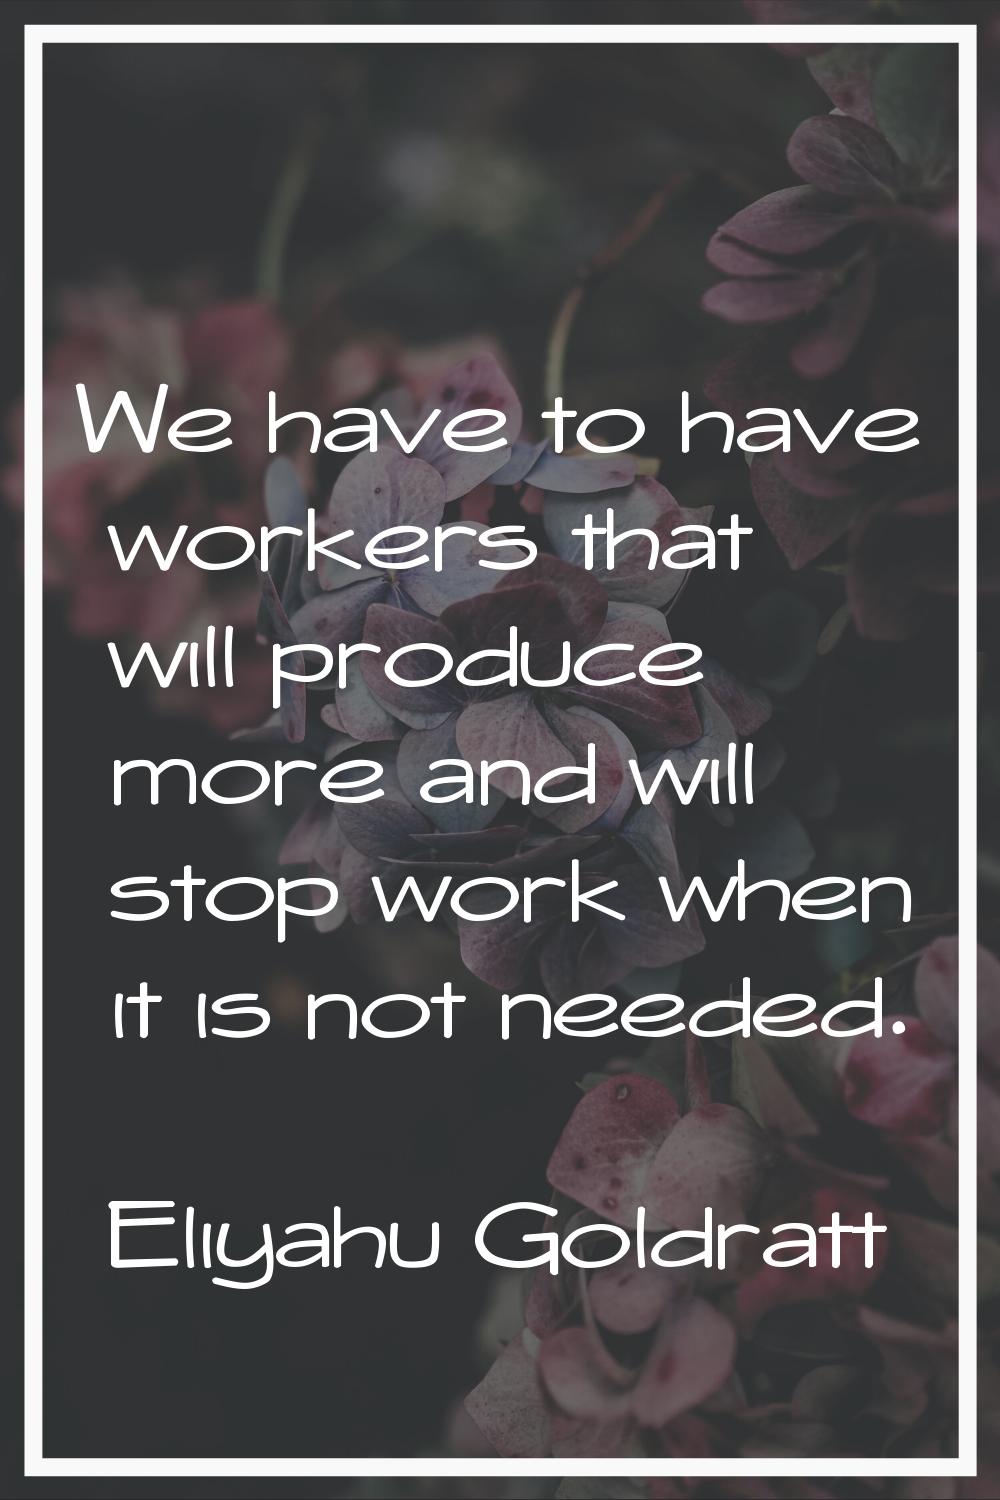 We have to have workers that will produce more and will stop work when it is not needed.